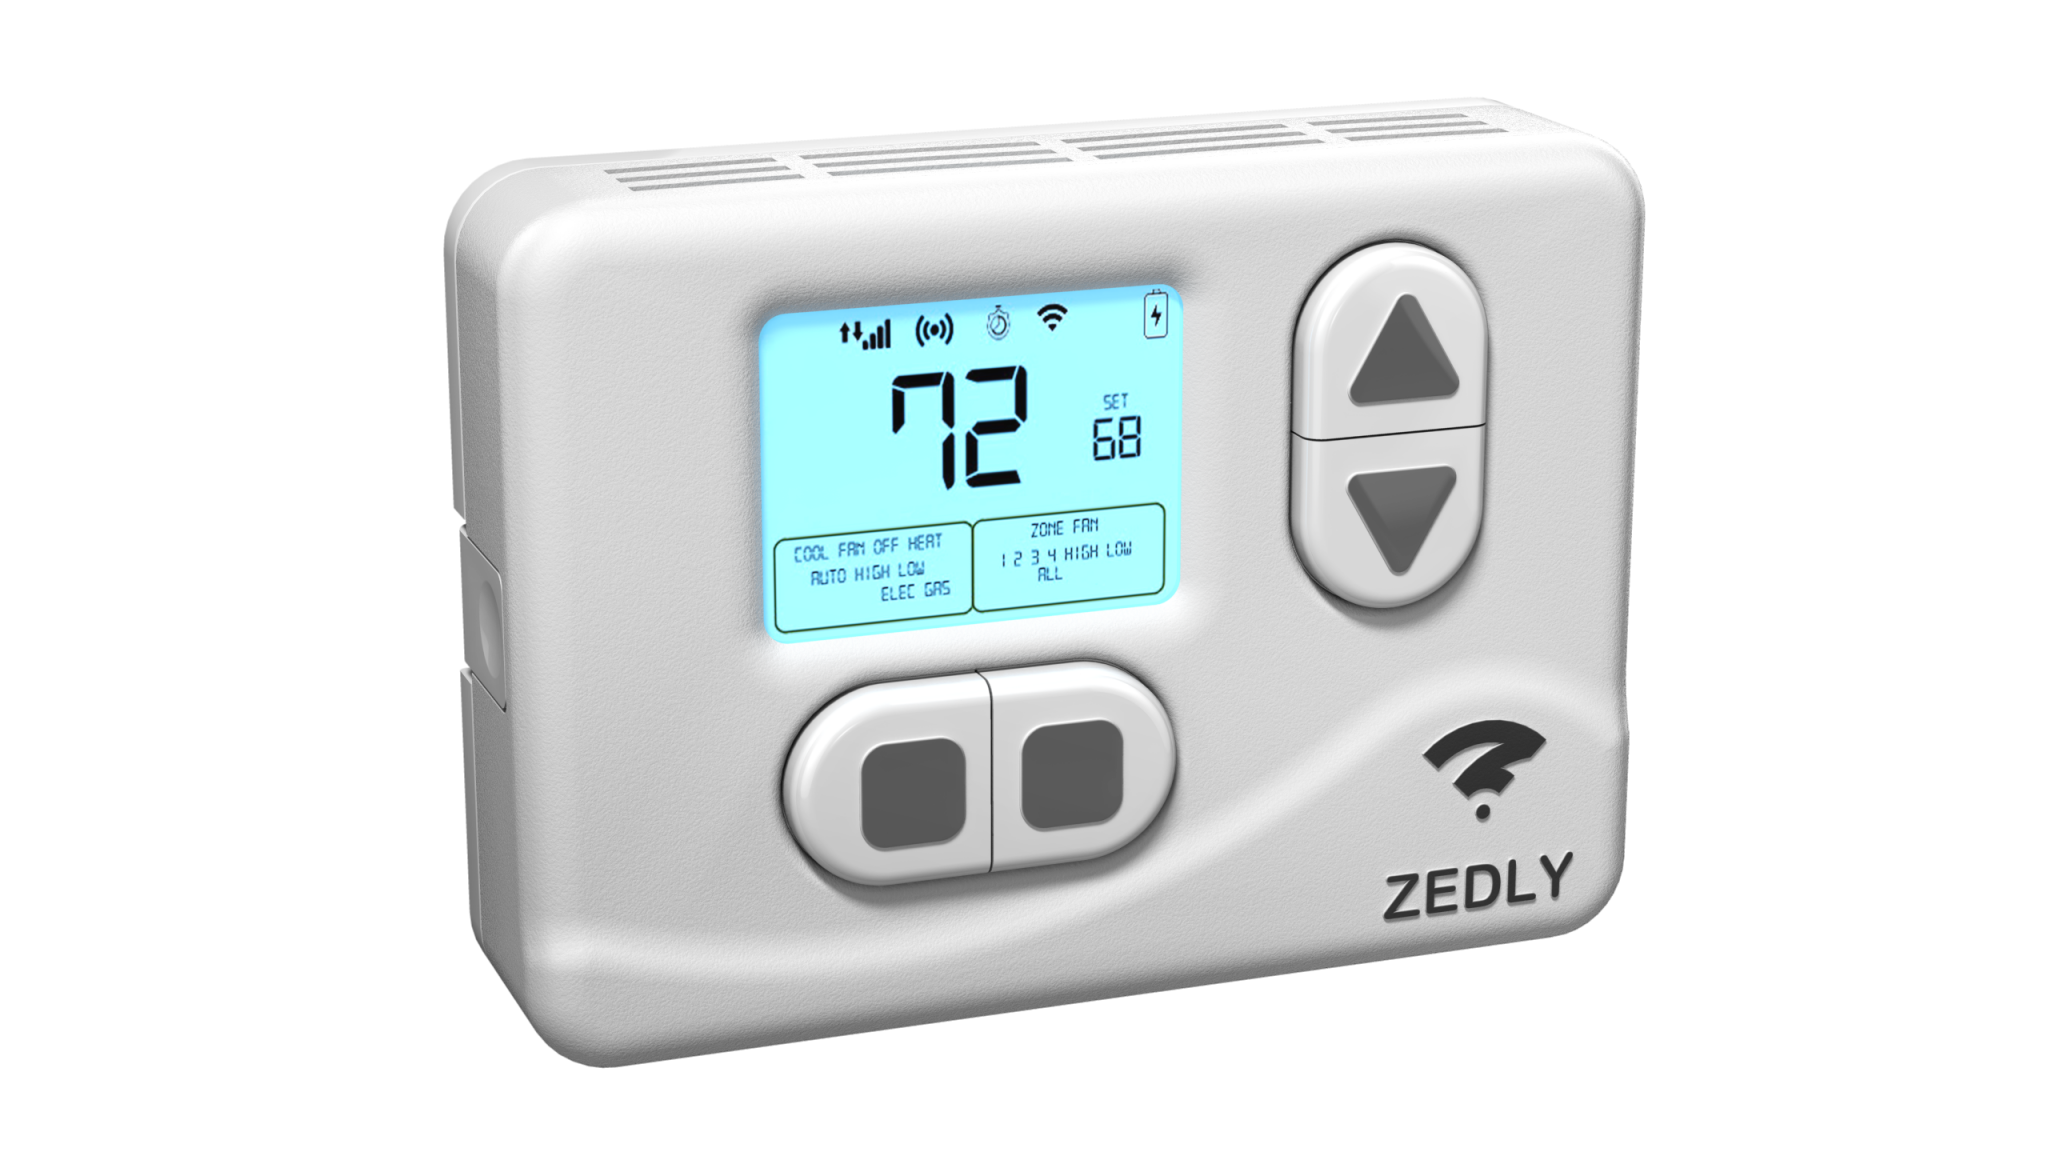 best rv temperature monitor for pets